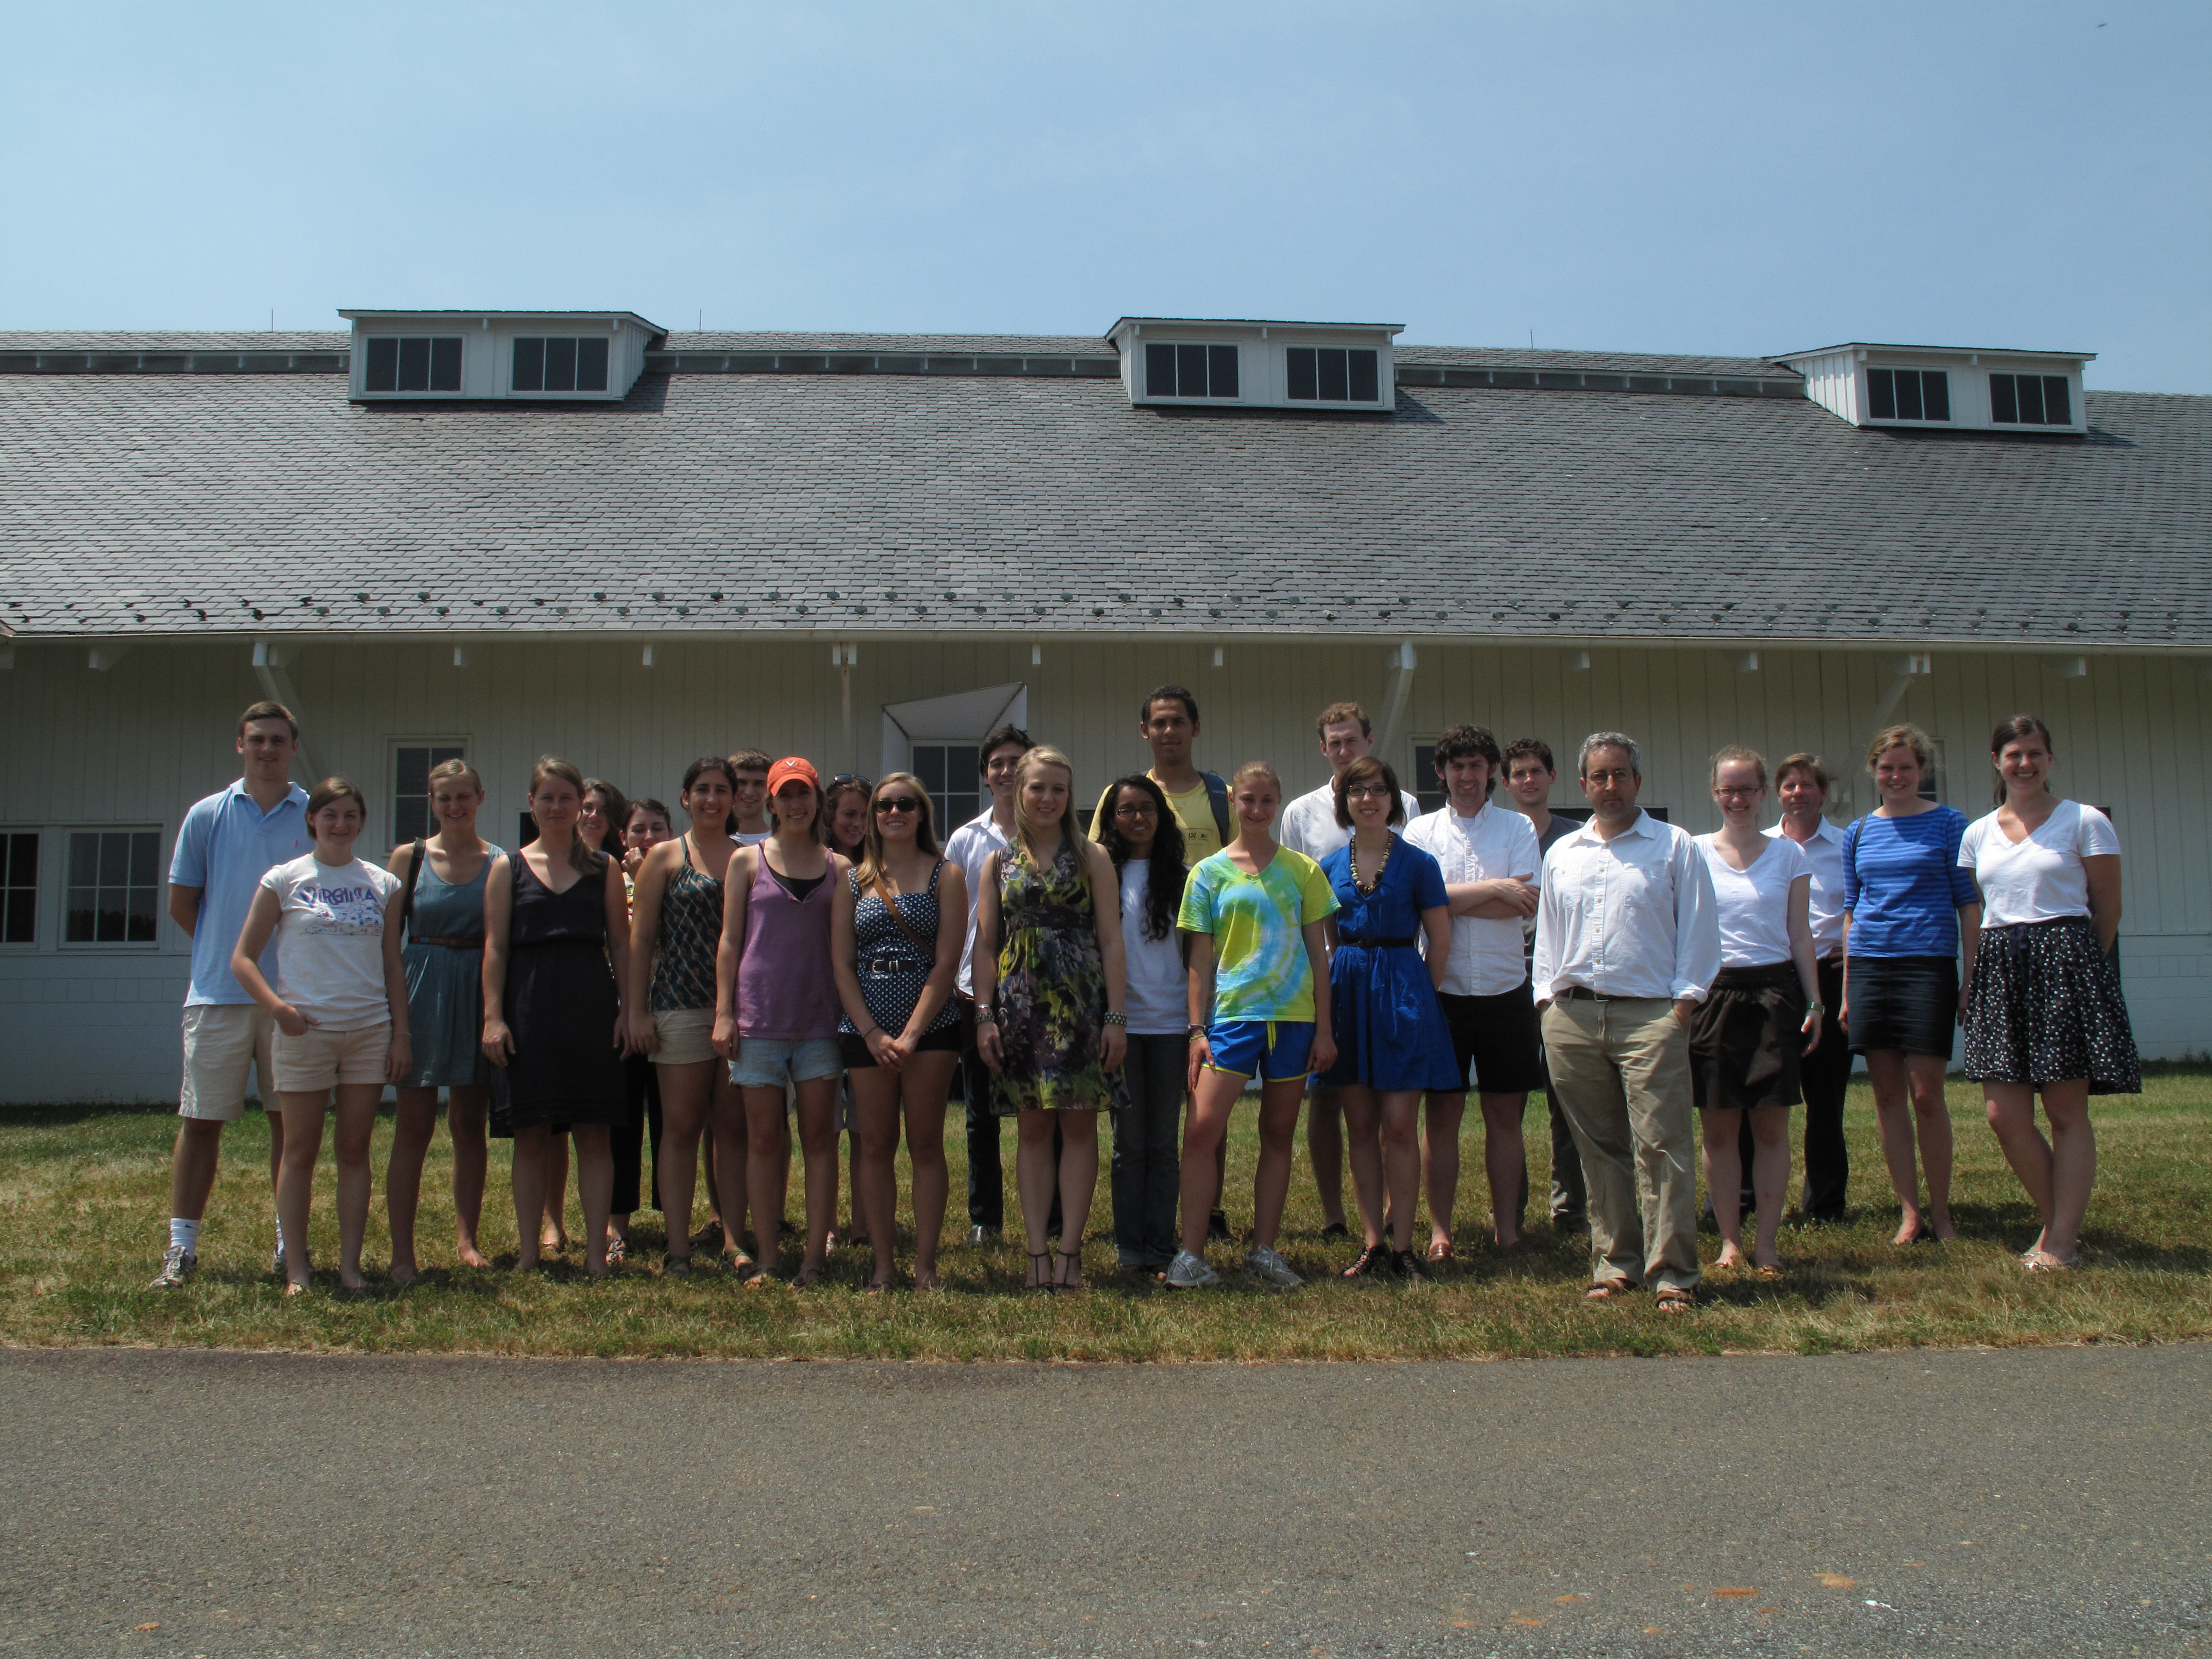 Group photo of the Morven farms staff in front of the Morven Horse Barn